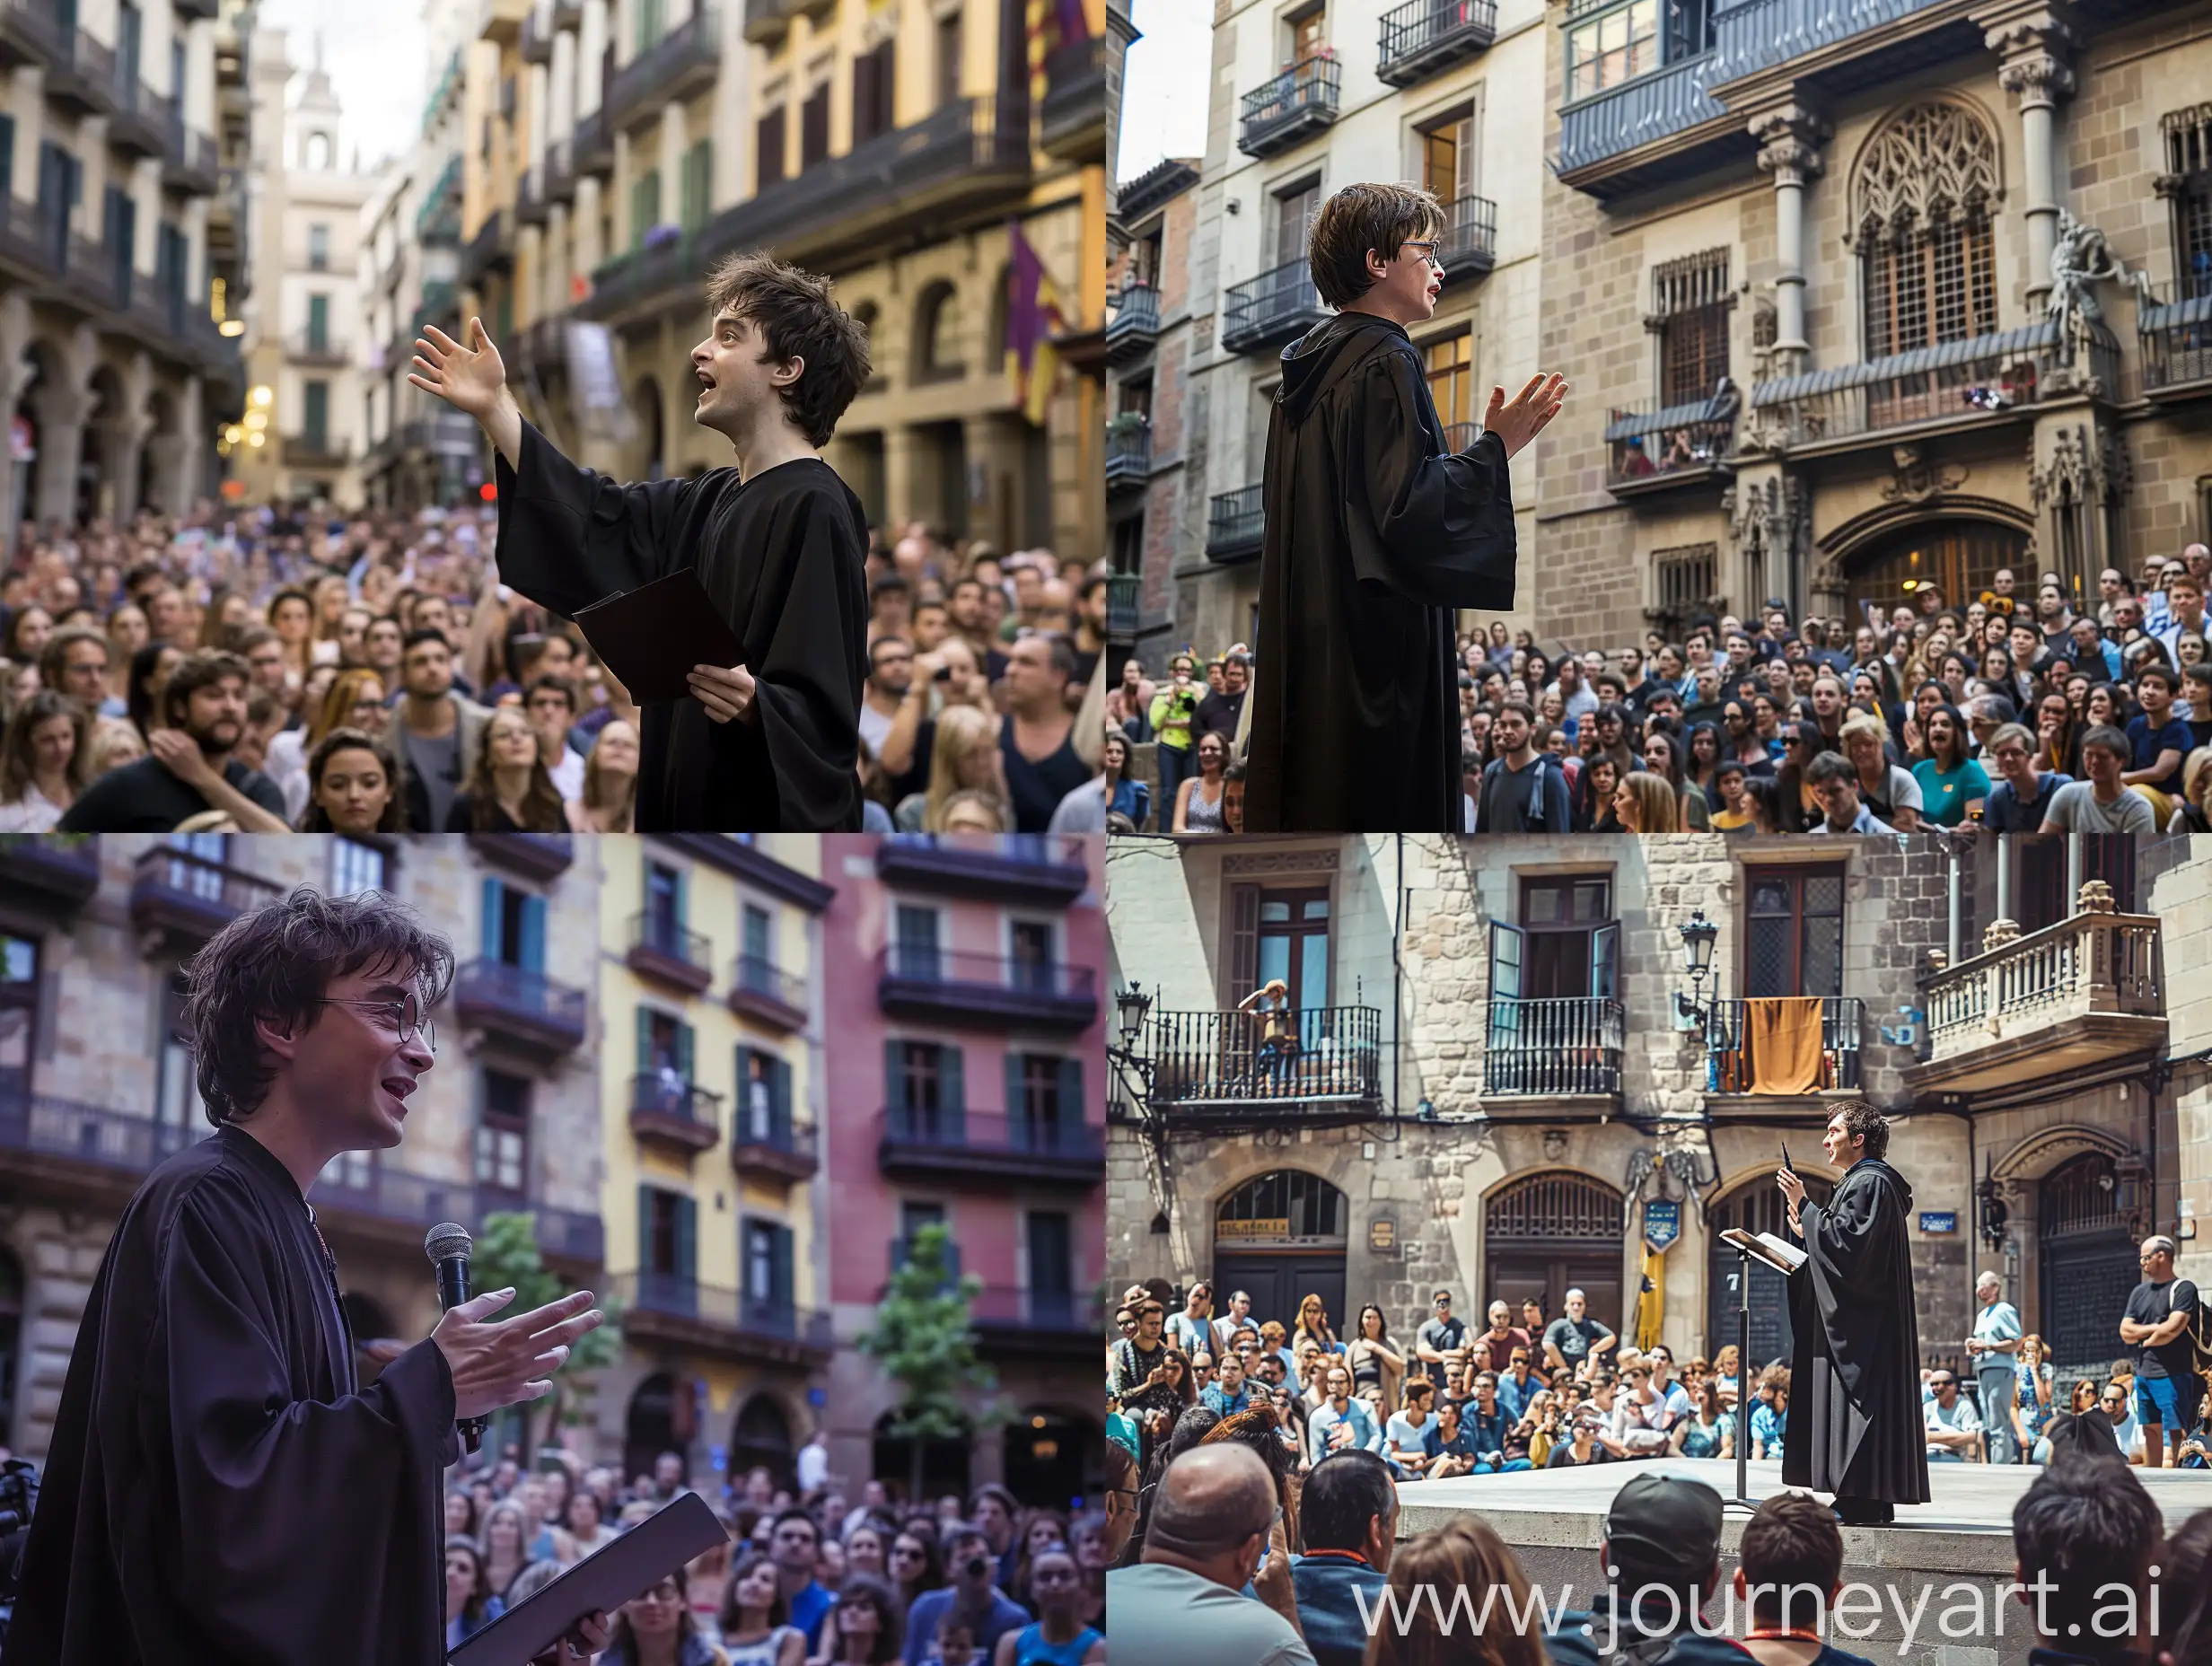 Harry Potter is giving a speech in the centre of Barcelona in the summer, very detailed photo